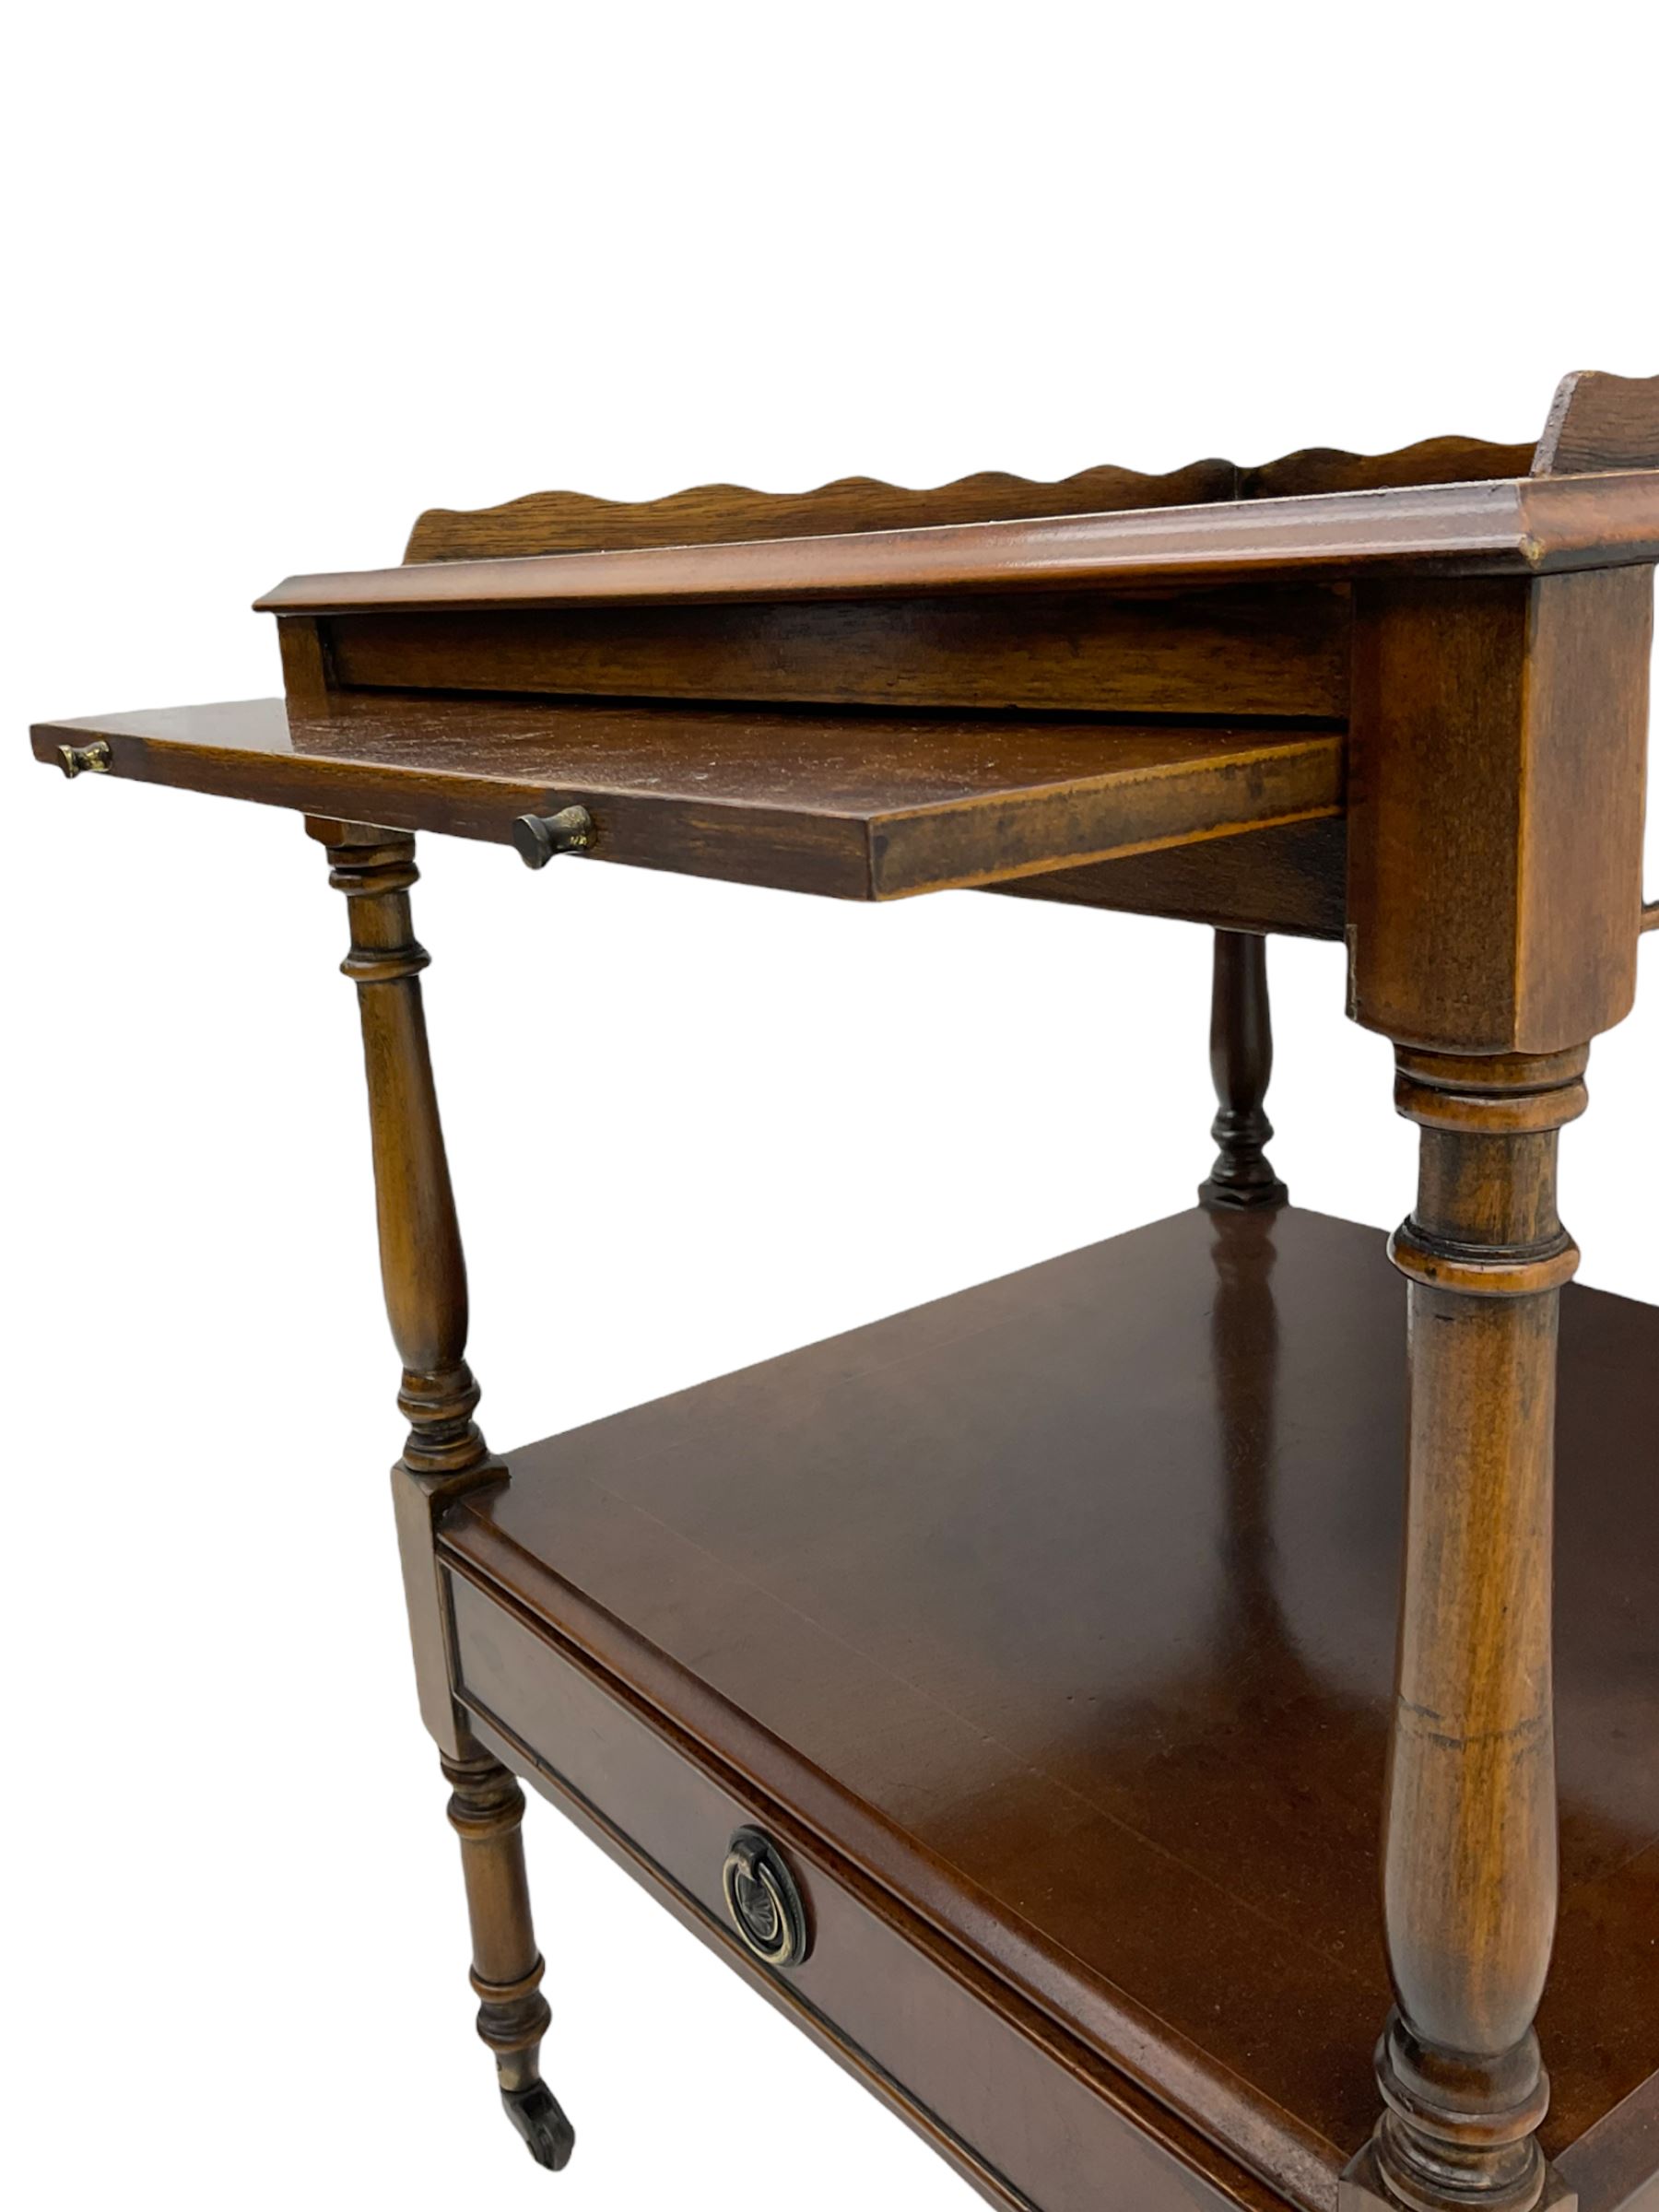 Figured walnut two tier occasional table - Image 5 of 8